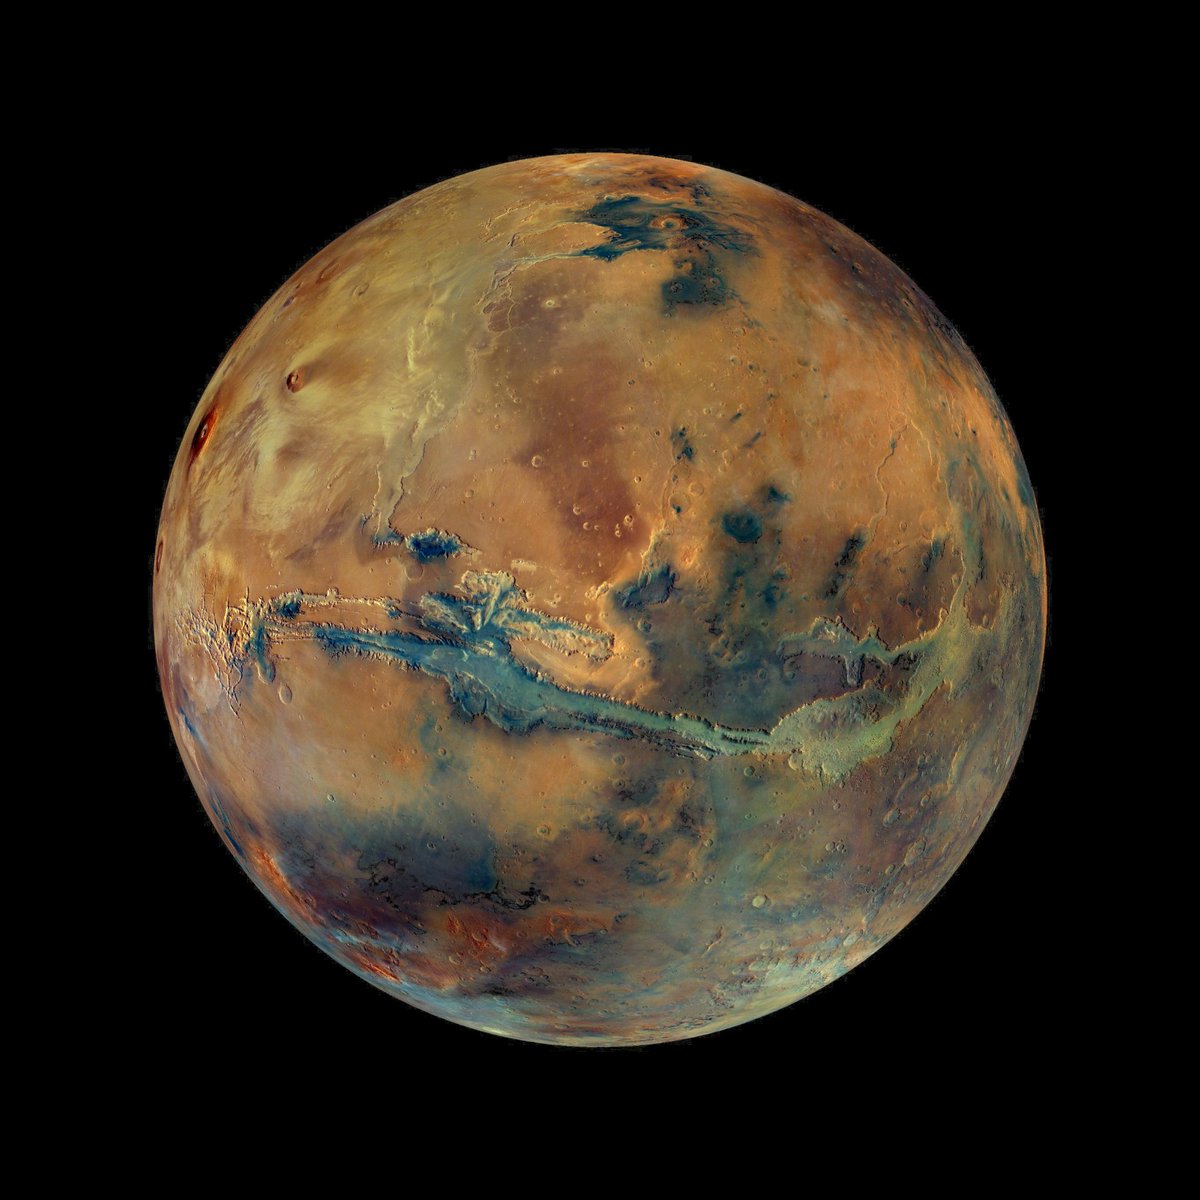 ESA's Mars Express orbiter has dropped a new image of the red planet